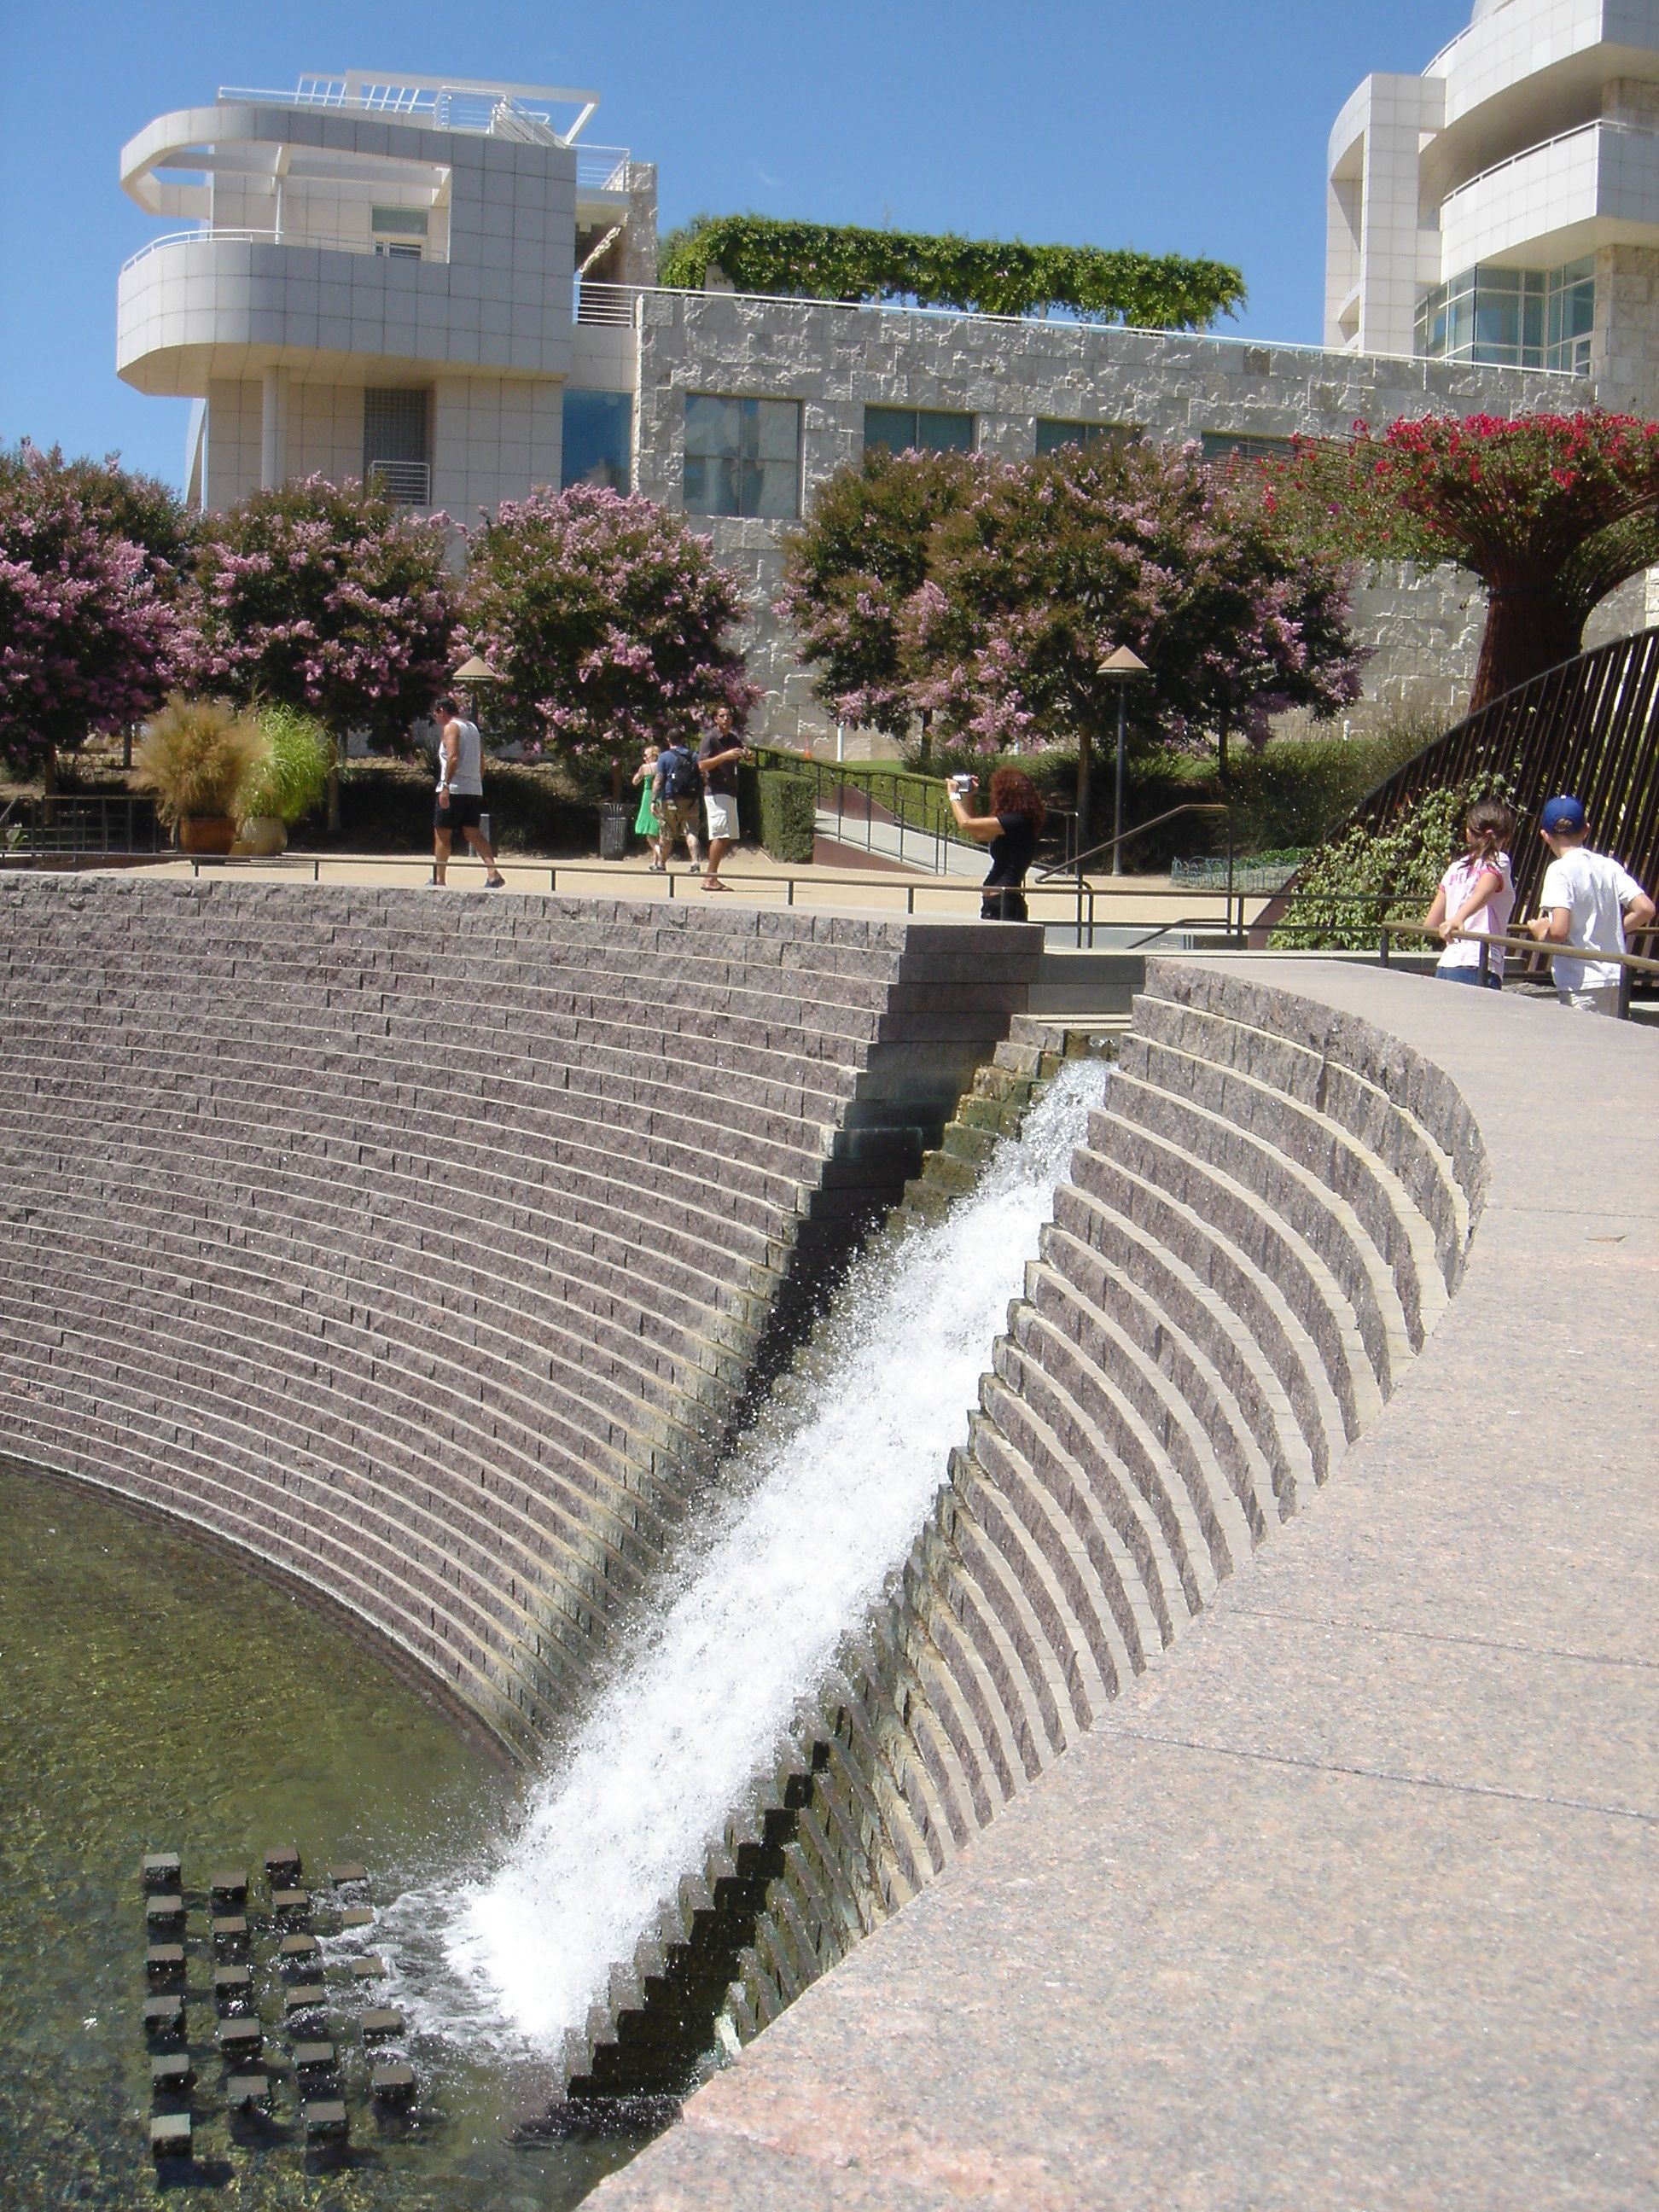 Getty center, Brentwood